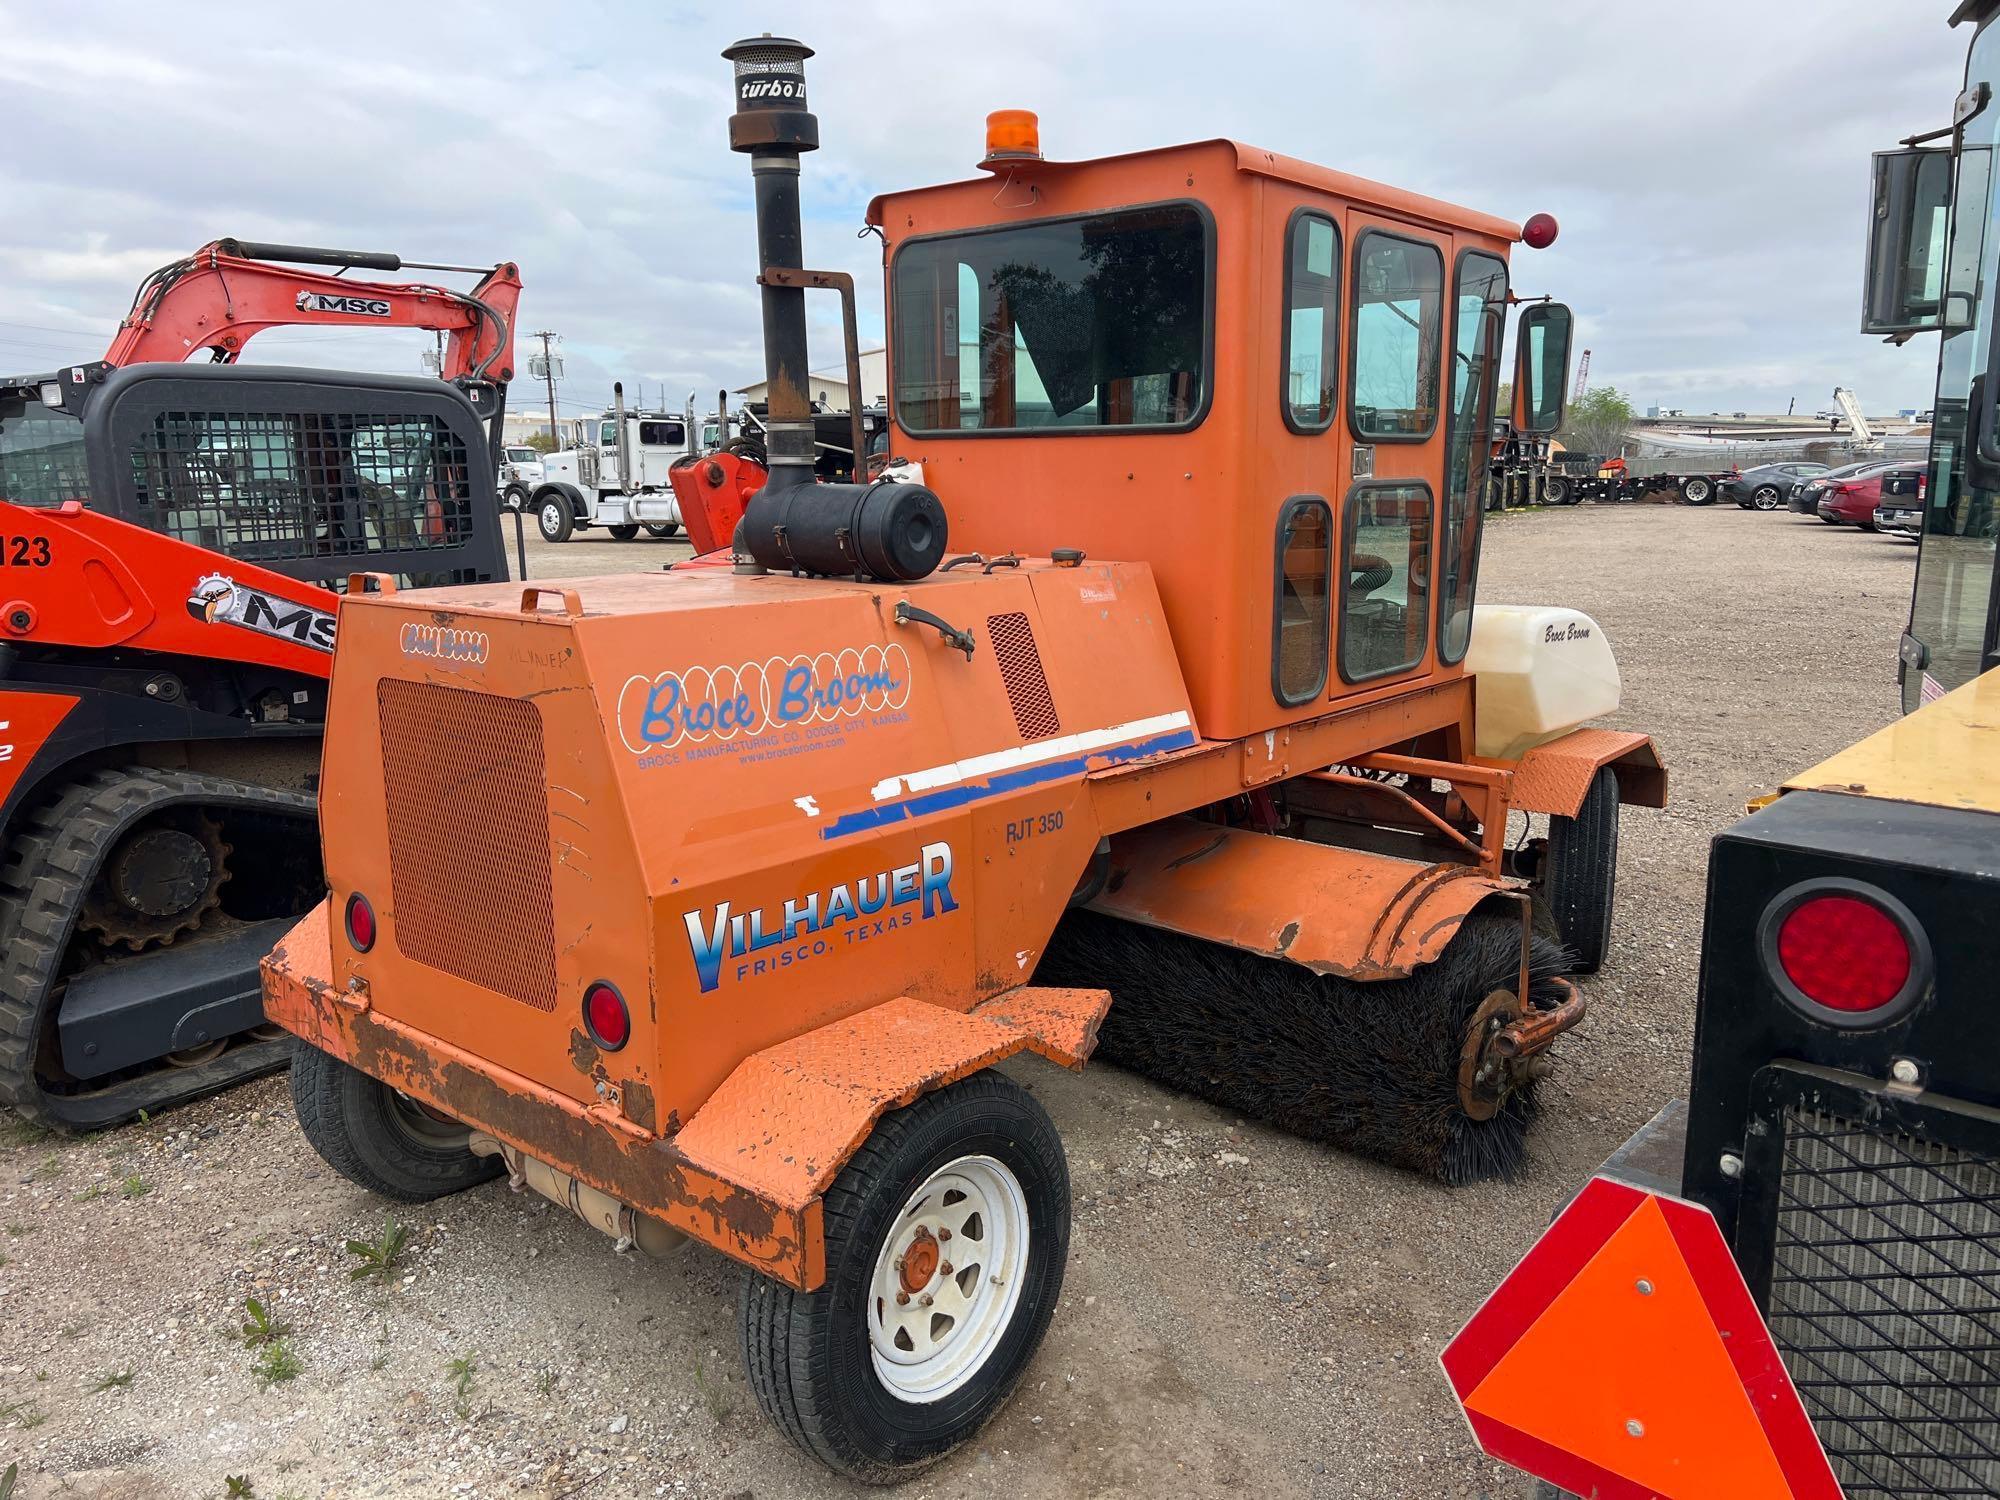 BROCE RJT350 SWEEPER SN:406738...powered by diesel engine, equipped with EROPS, air, heat, 8ft. broo